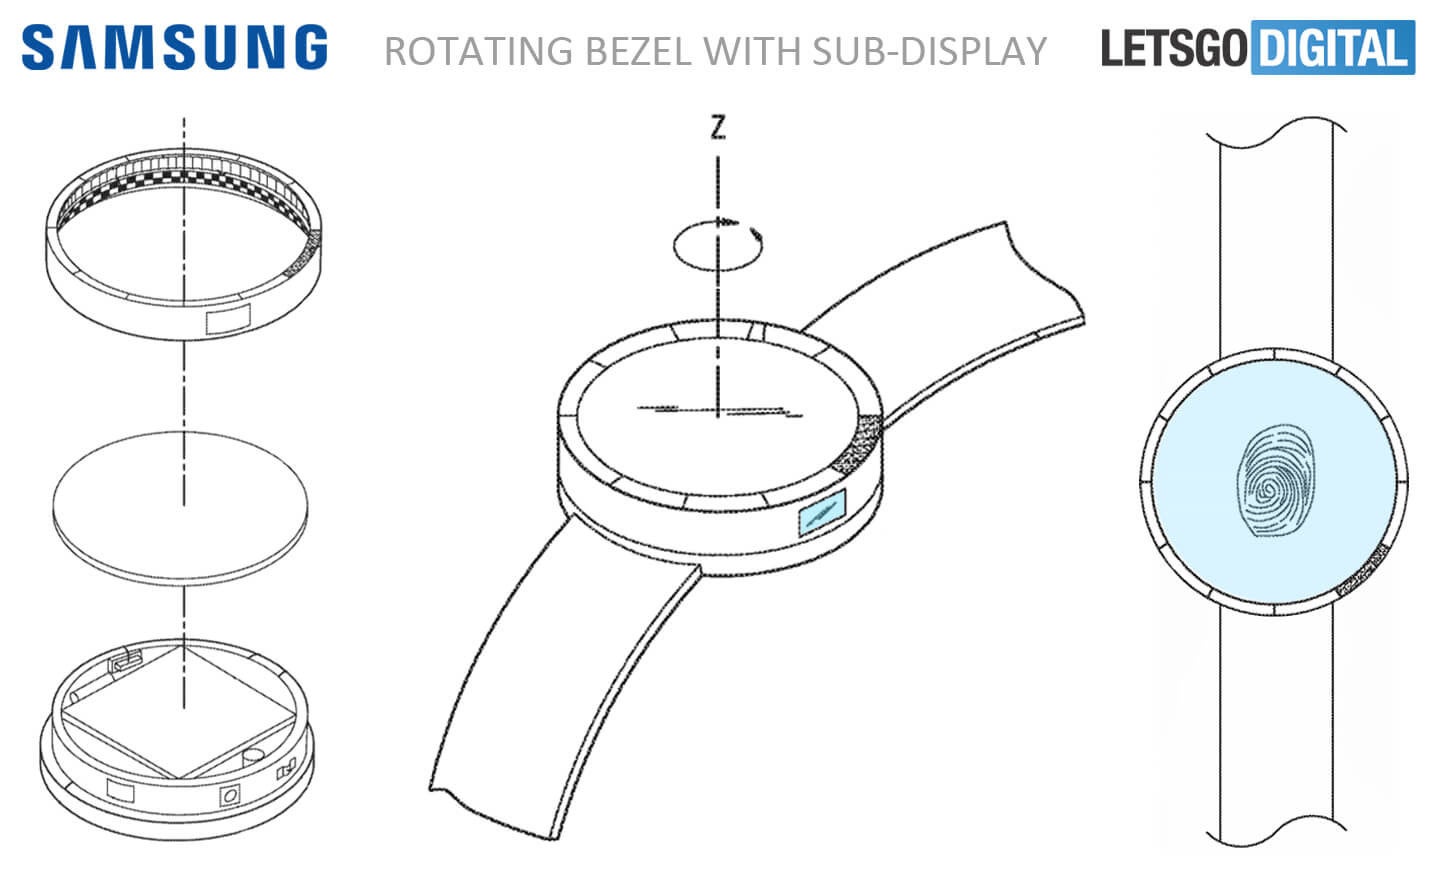 Samsung Gear S4 could feature watch straps with integrated battery, fingerprint sensor